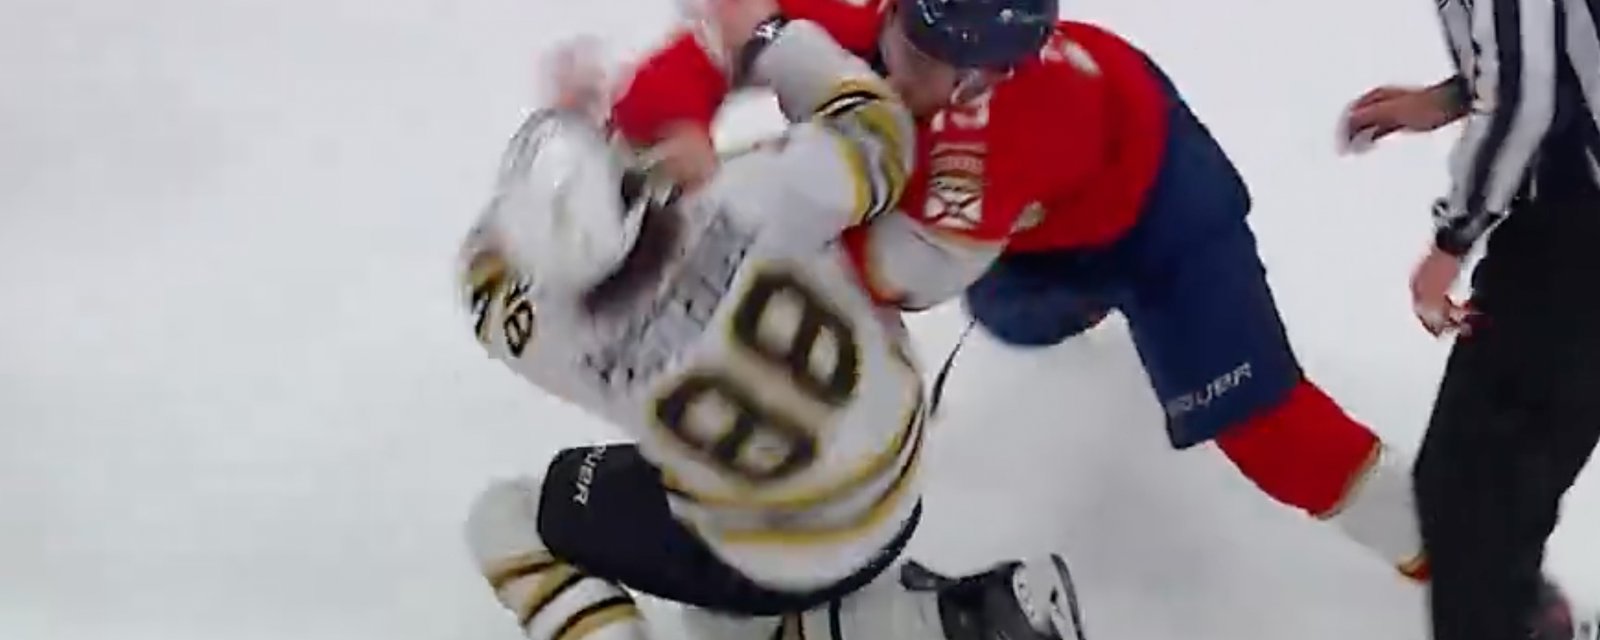 Matthew Tkachuk and David Pastrnak throw down, land huge punches in heated fight! 